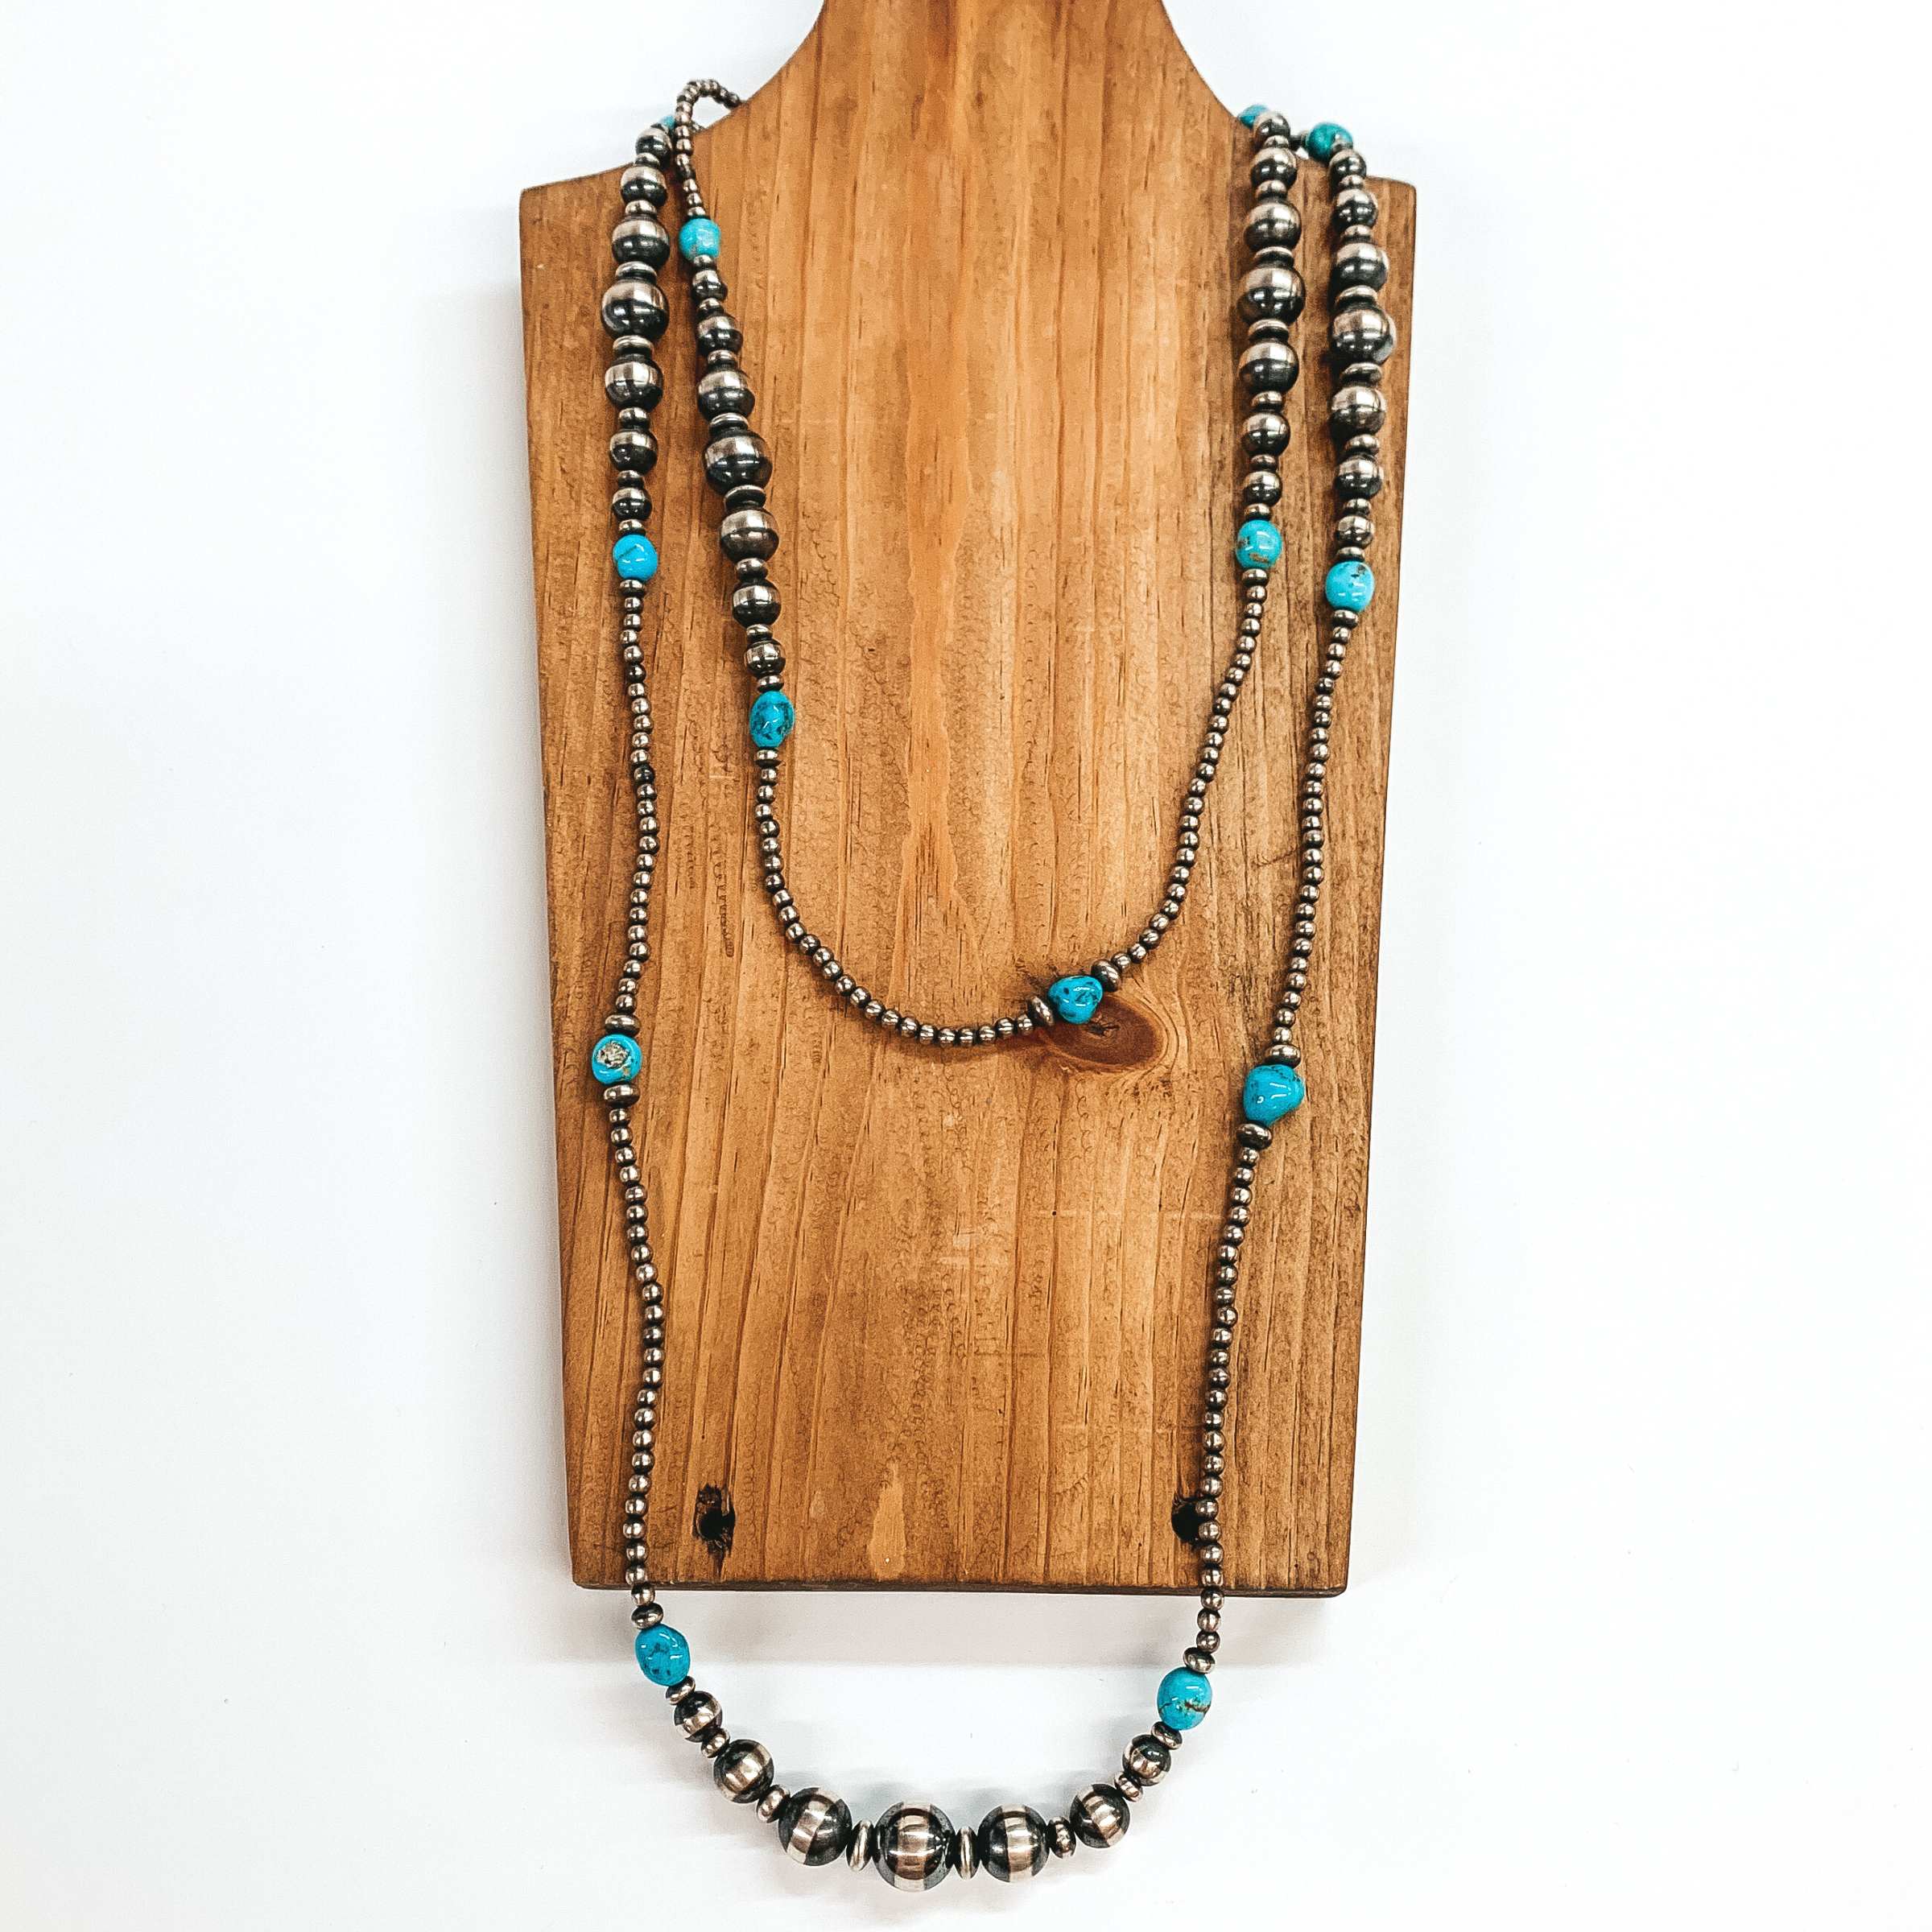 Silver graduated beaded necklace with turquoise stone spacers. This necklace is pictured laying on a wood necklace holder on a white background.